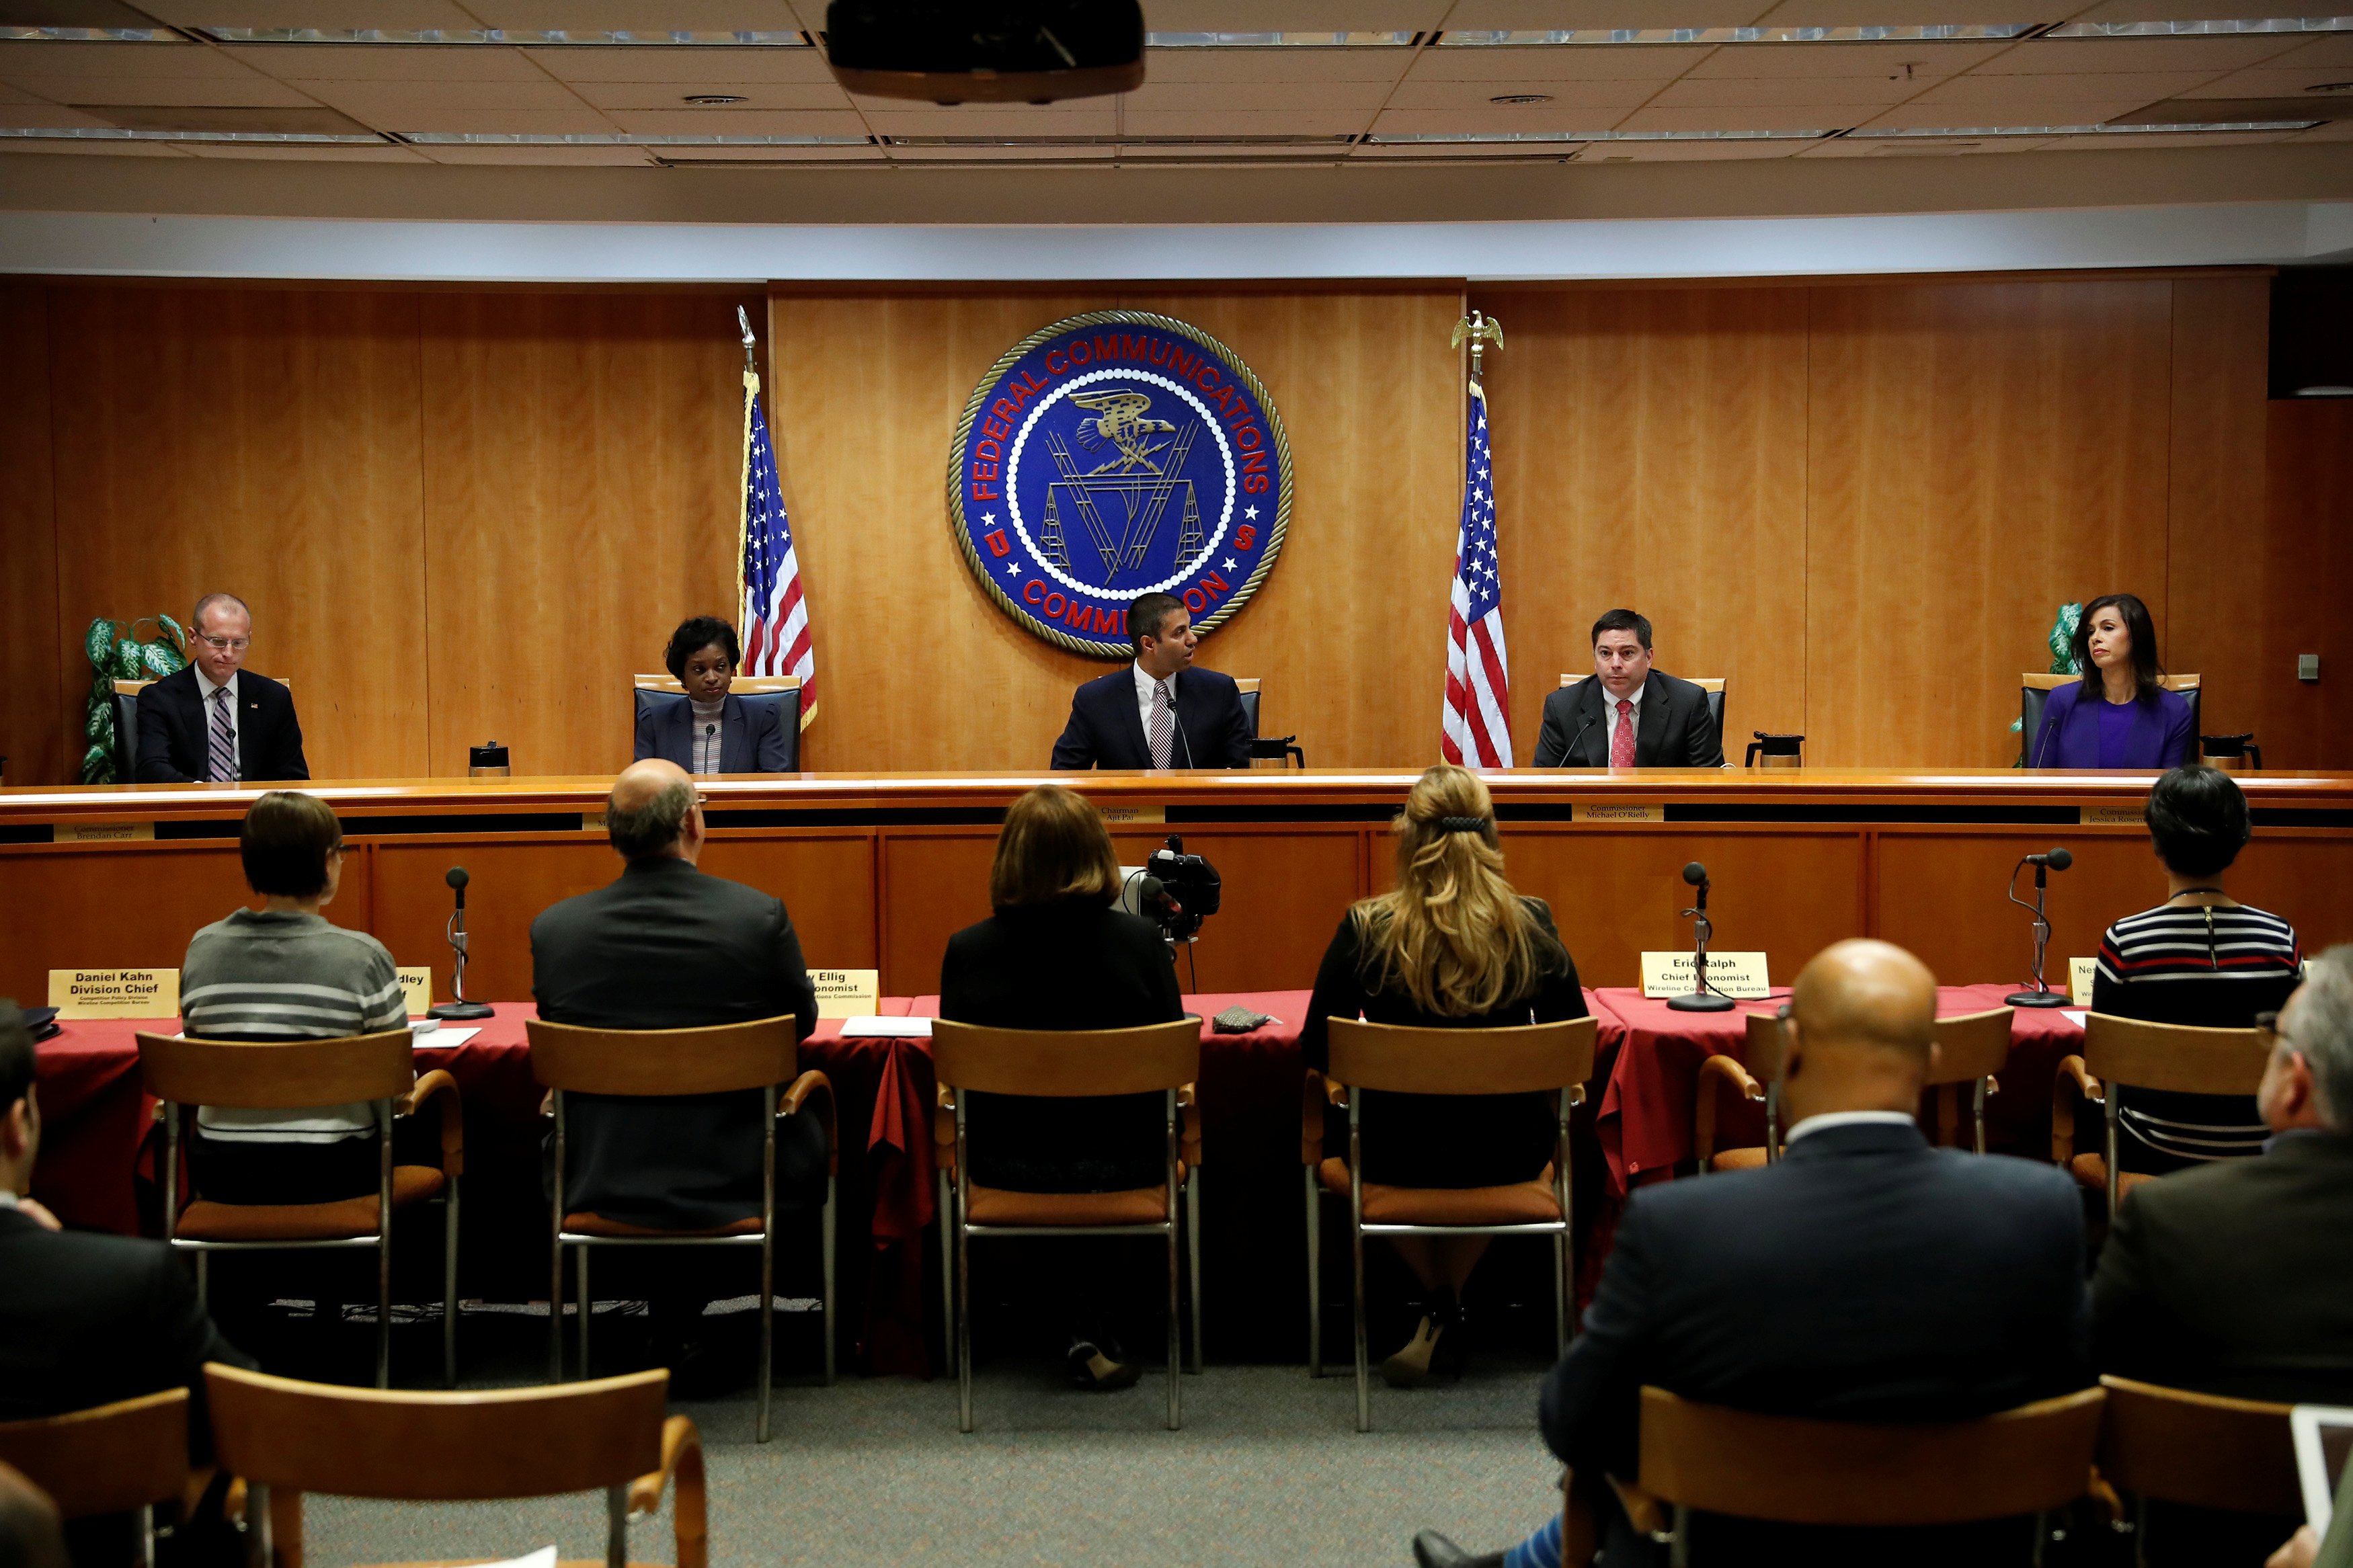 Chairman Ajit Pai (C) leads a vote on the repeal of so called net neutrality rules at the Federal Communications Commission in Washington, U.S., December 14, 2017. REUTERS/Aaron P. Bernstein